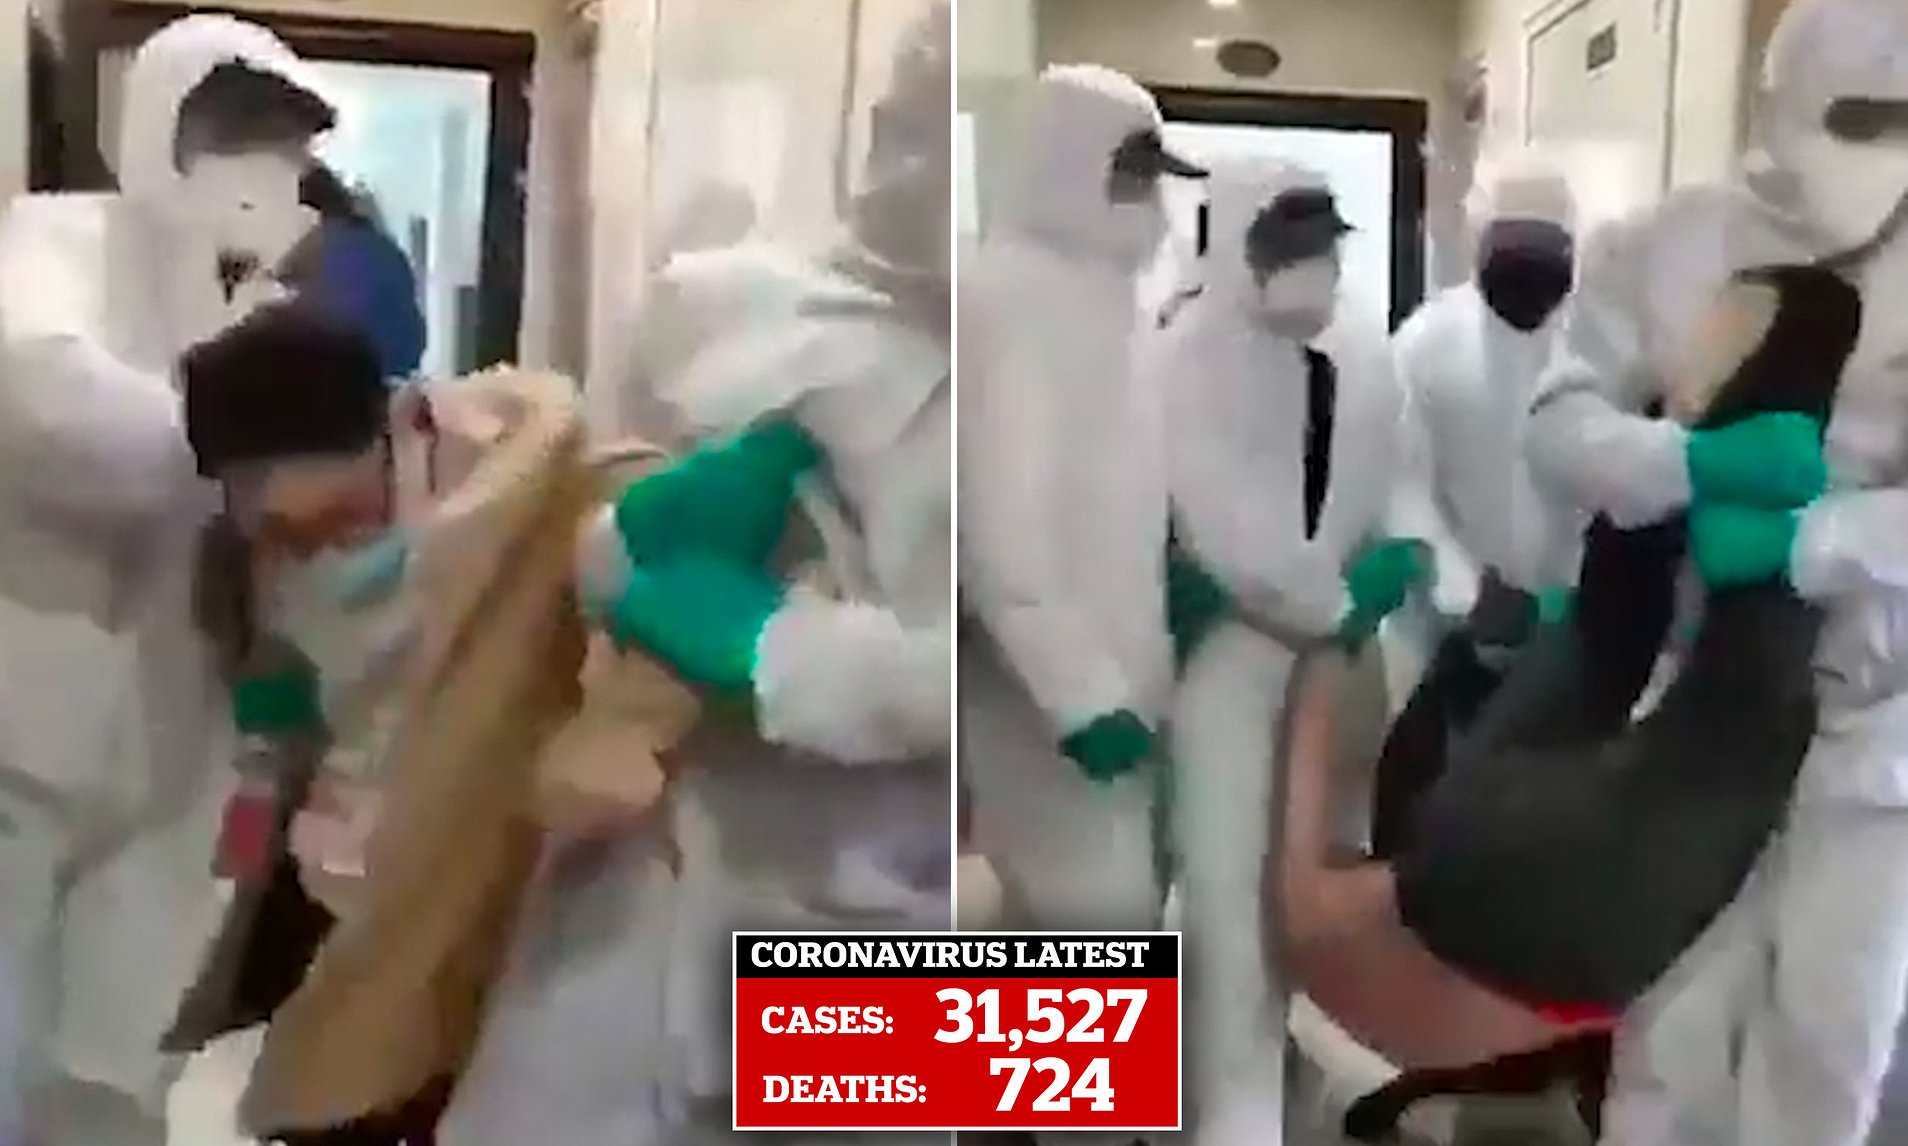 Eighty-six people die of coronavirus in a DAY in China as Beijing begins mass arrest of sufferers and videos shows hazmat suit-clad goons dragging people from their homes as the death toll hits 724